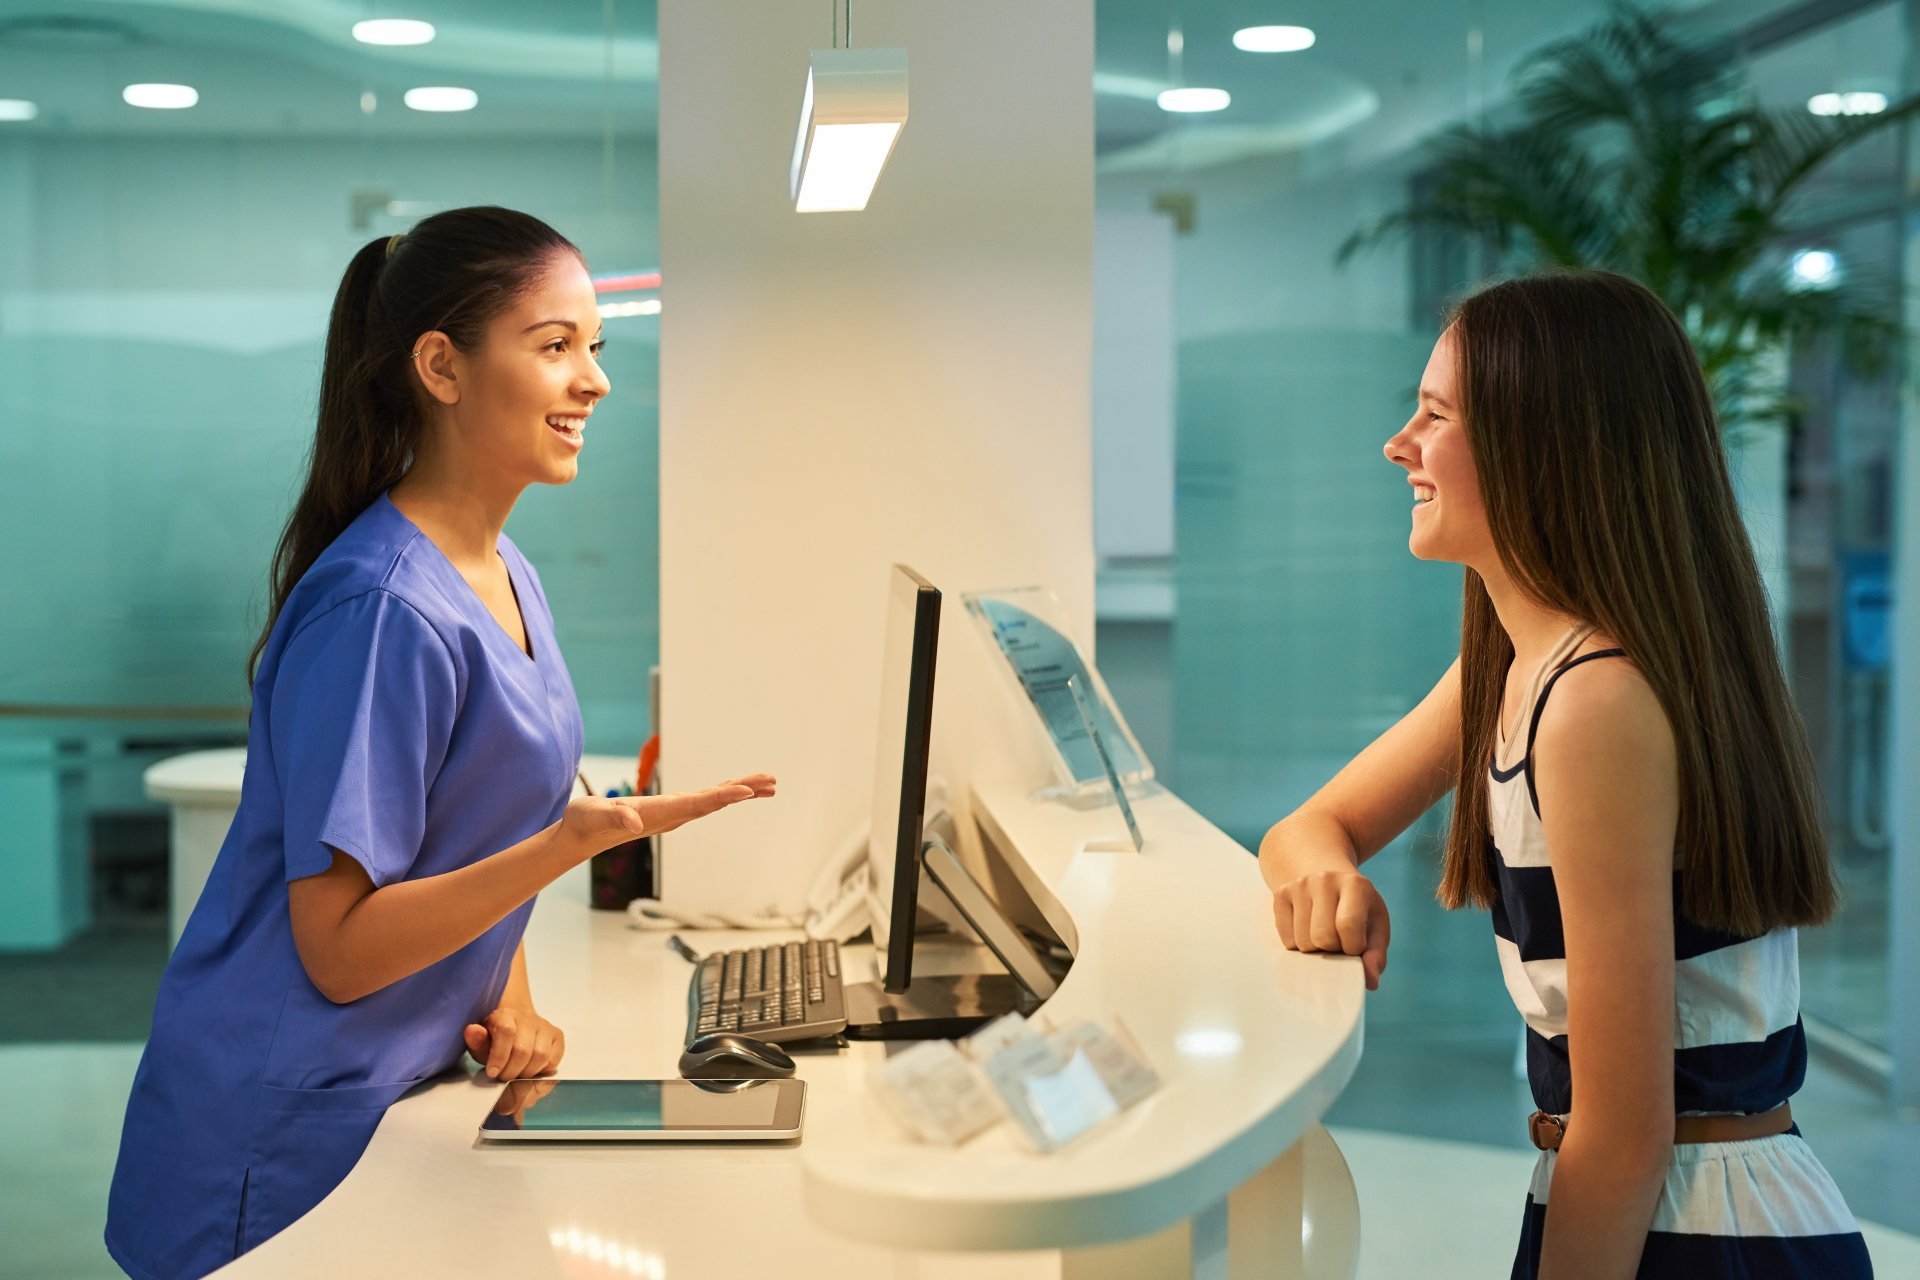 A young female healthcare worker smiles and greets a patient at the front desk of her workplace.